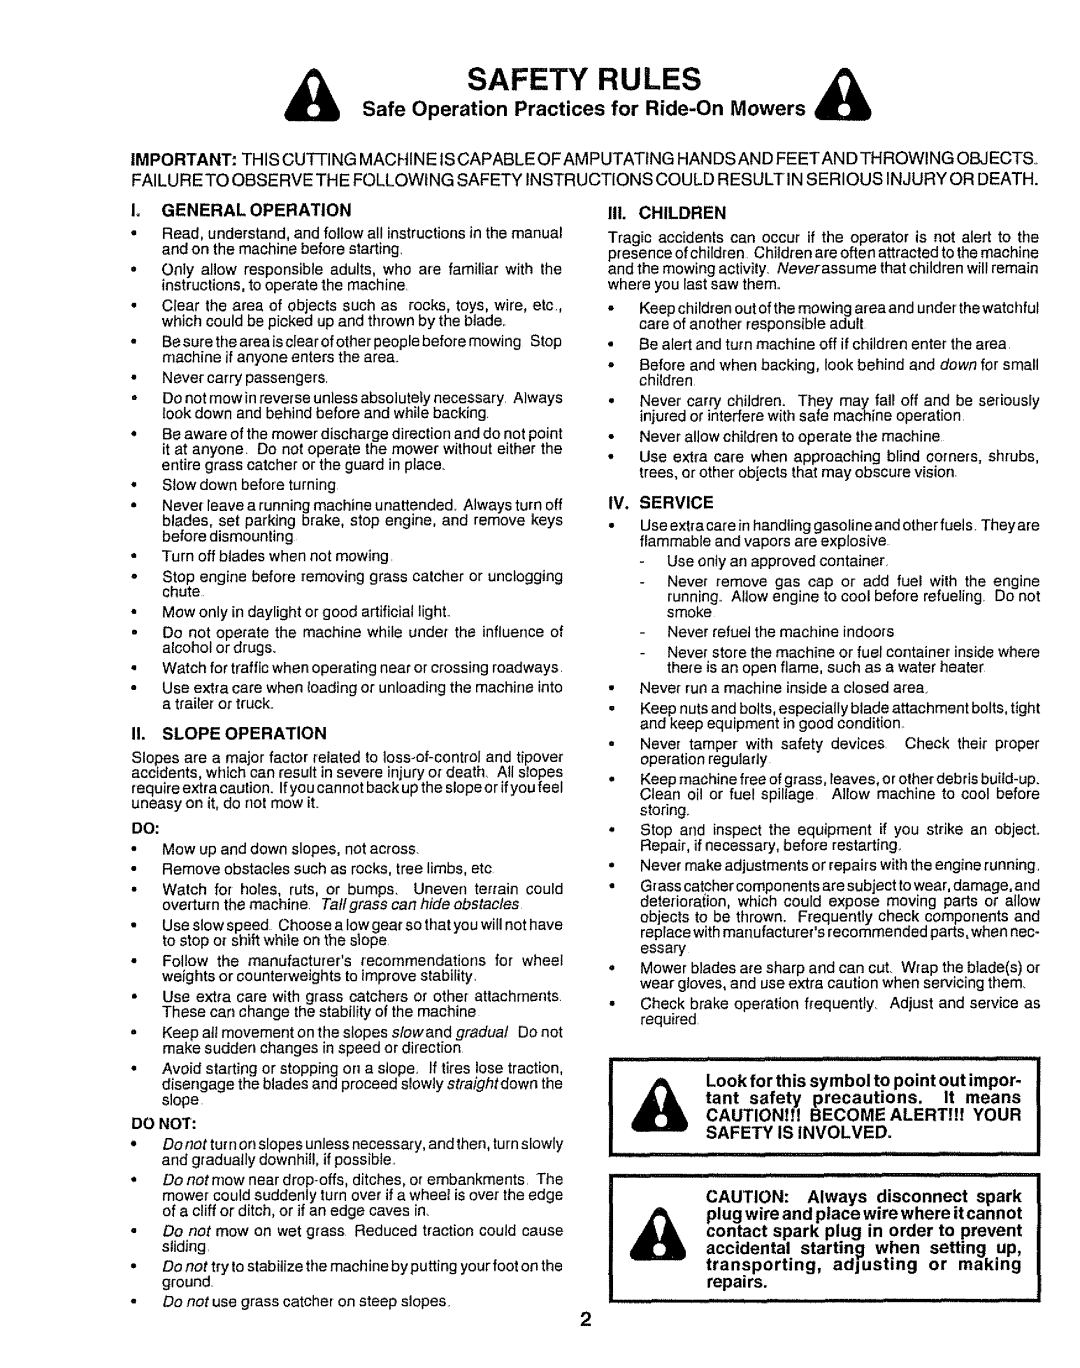 Sears 917.25545 Safe Operation Practices for Ride-OnMowers, tant safety, precautions, It means, BECOMEALERTlf, Your 